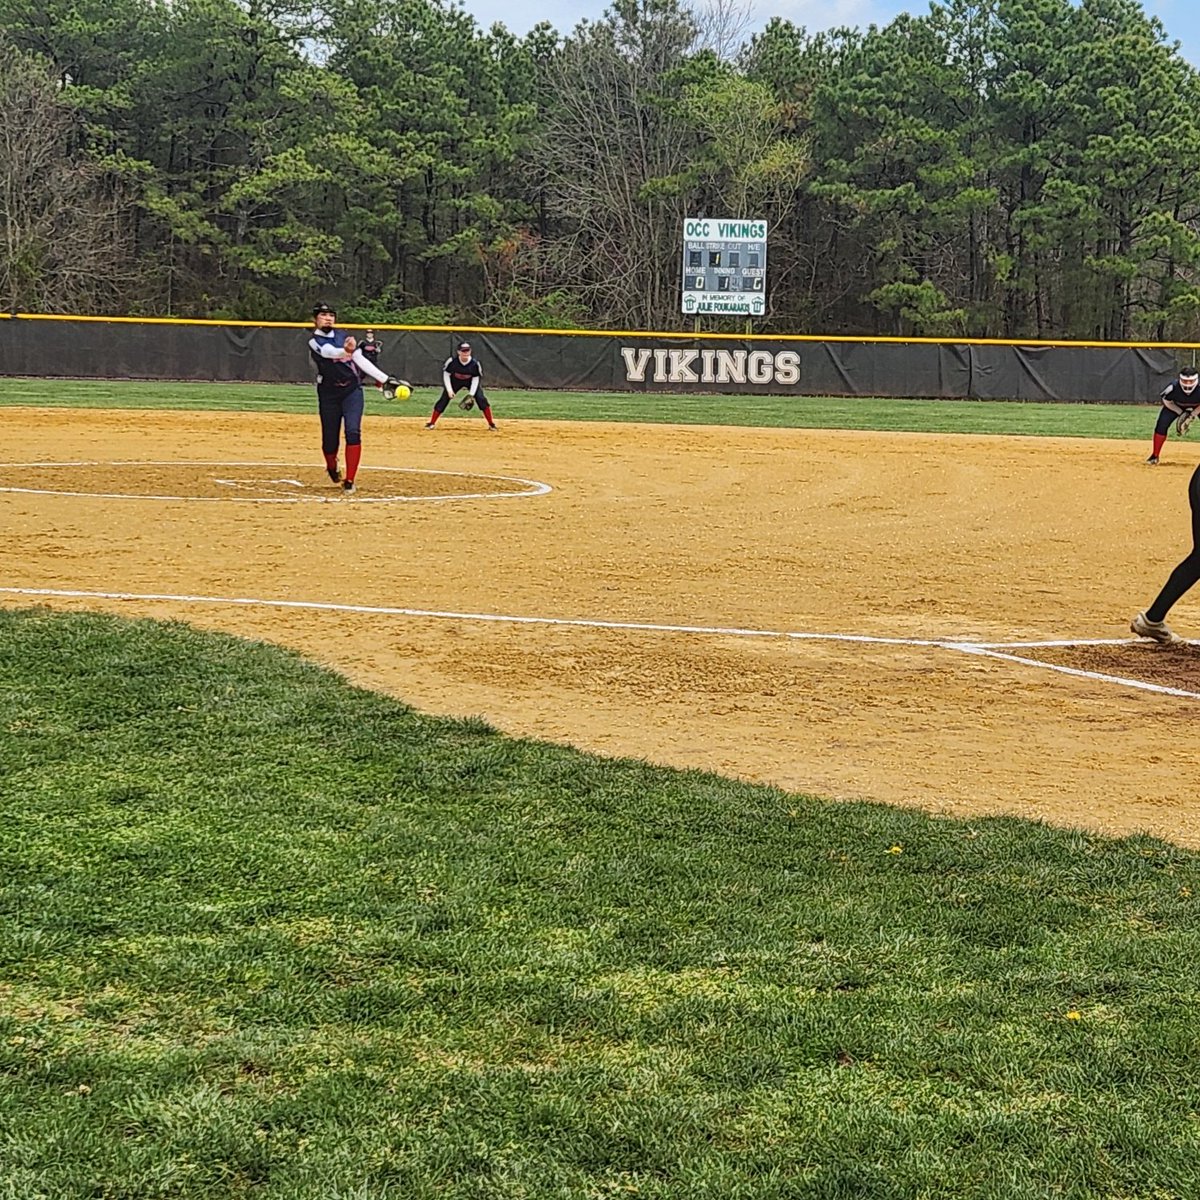 Ocean County College Softball travels to Salem CC this afternoon for a 12 P.M. doubleheader versus the Mighty Oaks! Let's go, ladies! 🥎 Live links: Game 1: youtube.com/live/tr_2Br11A… Game 2: youtube.com/live/iOH_3tJ-K…